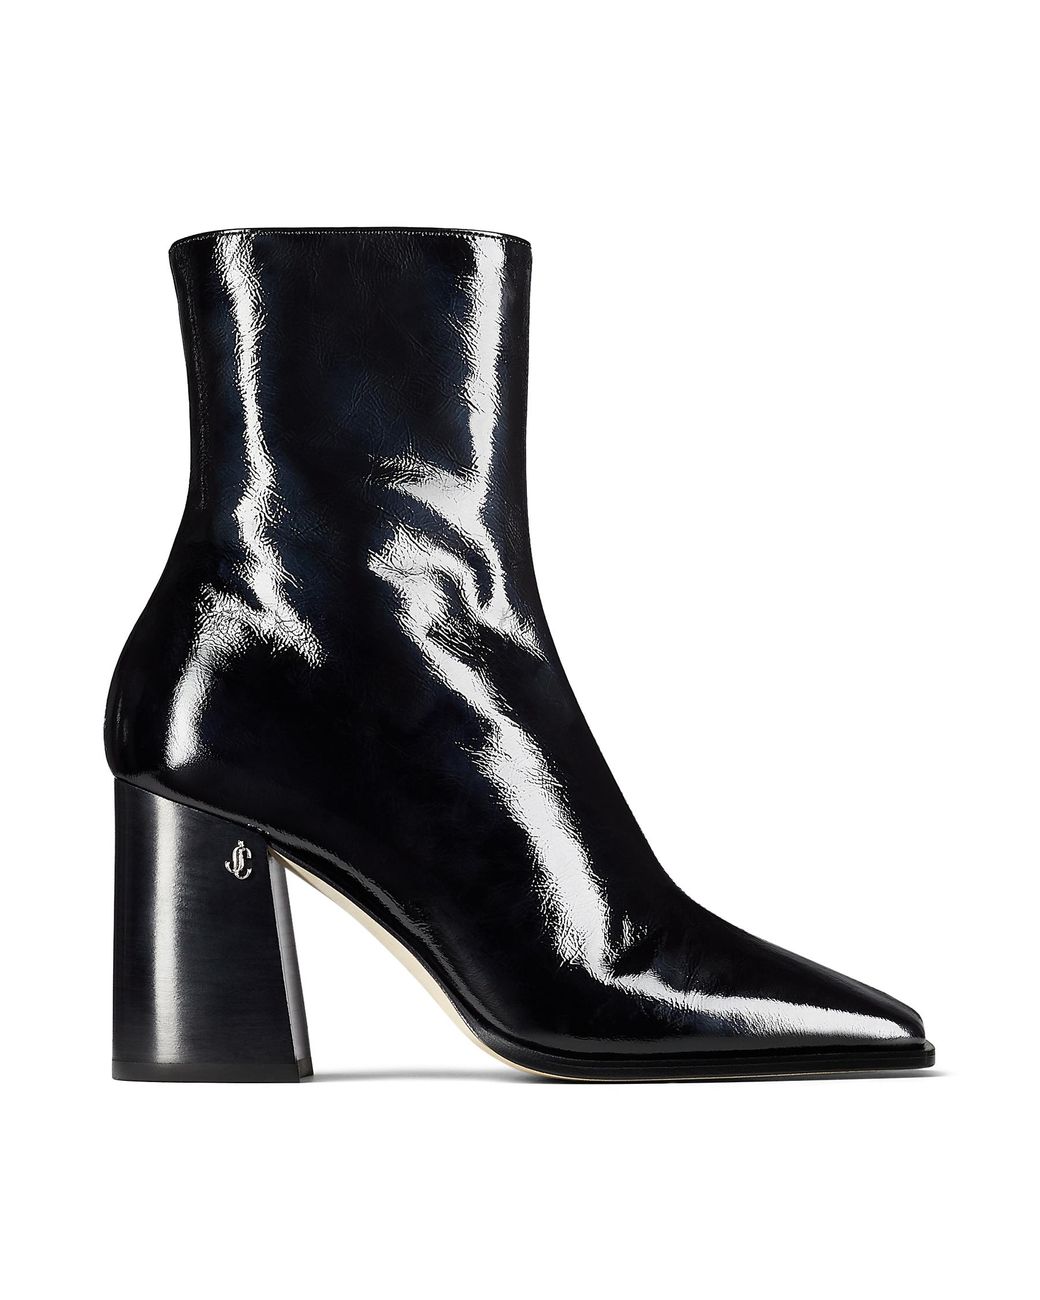 Jimmy Choo Bryelle 85 Patent-leather Ankle Boots in Black - Save 14% - Lyst